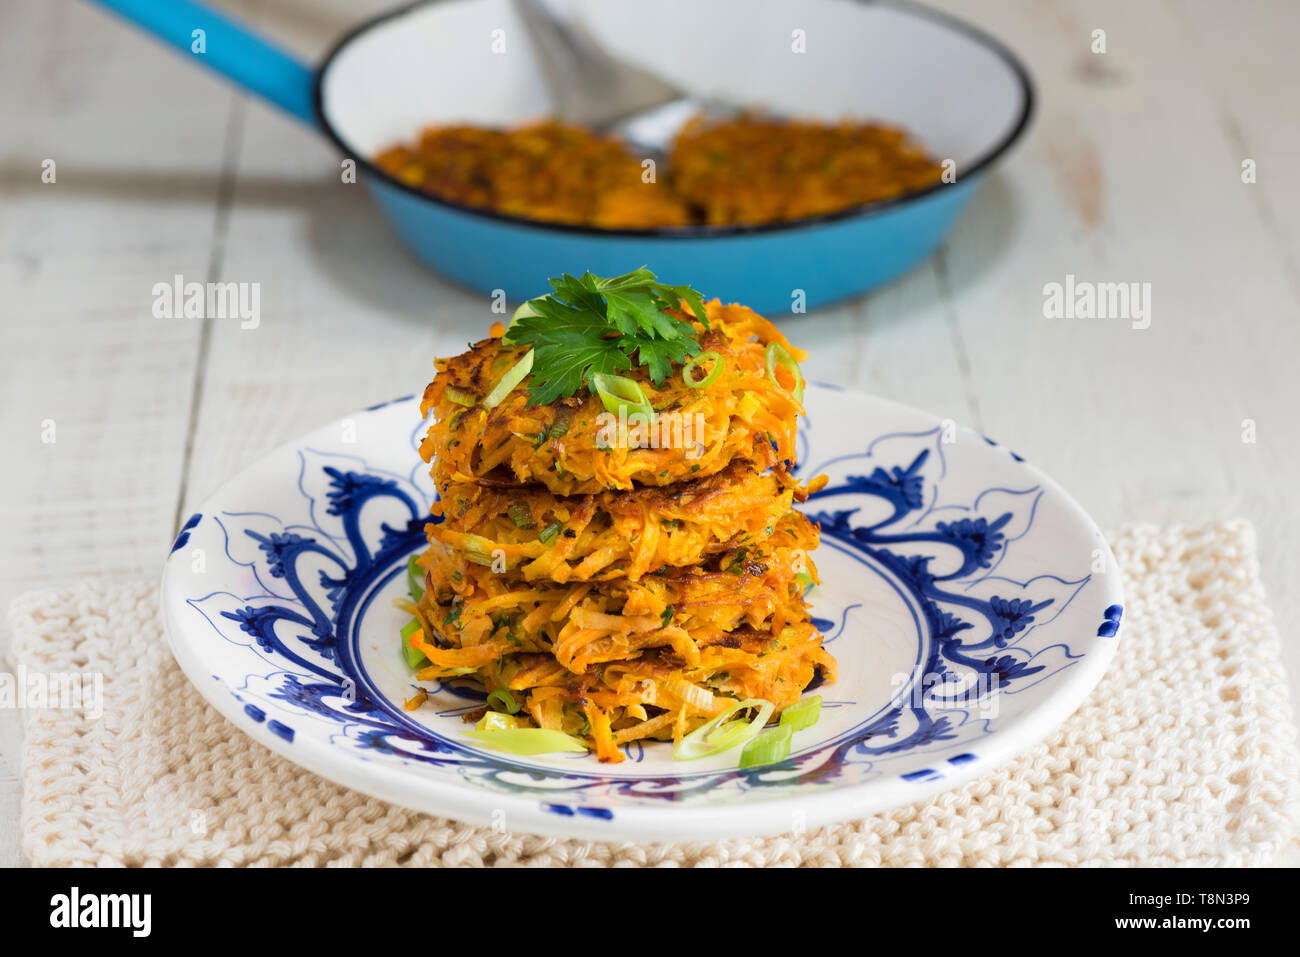 A stack of four sweet potato and carrot rostis on a blue and white plate. Stock Photo